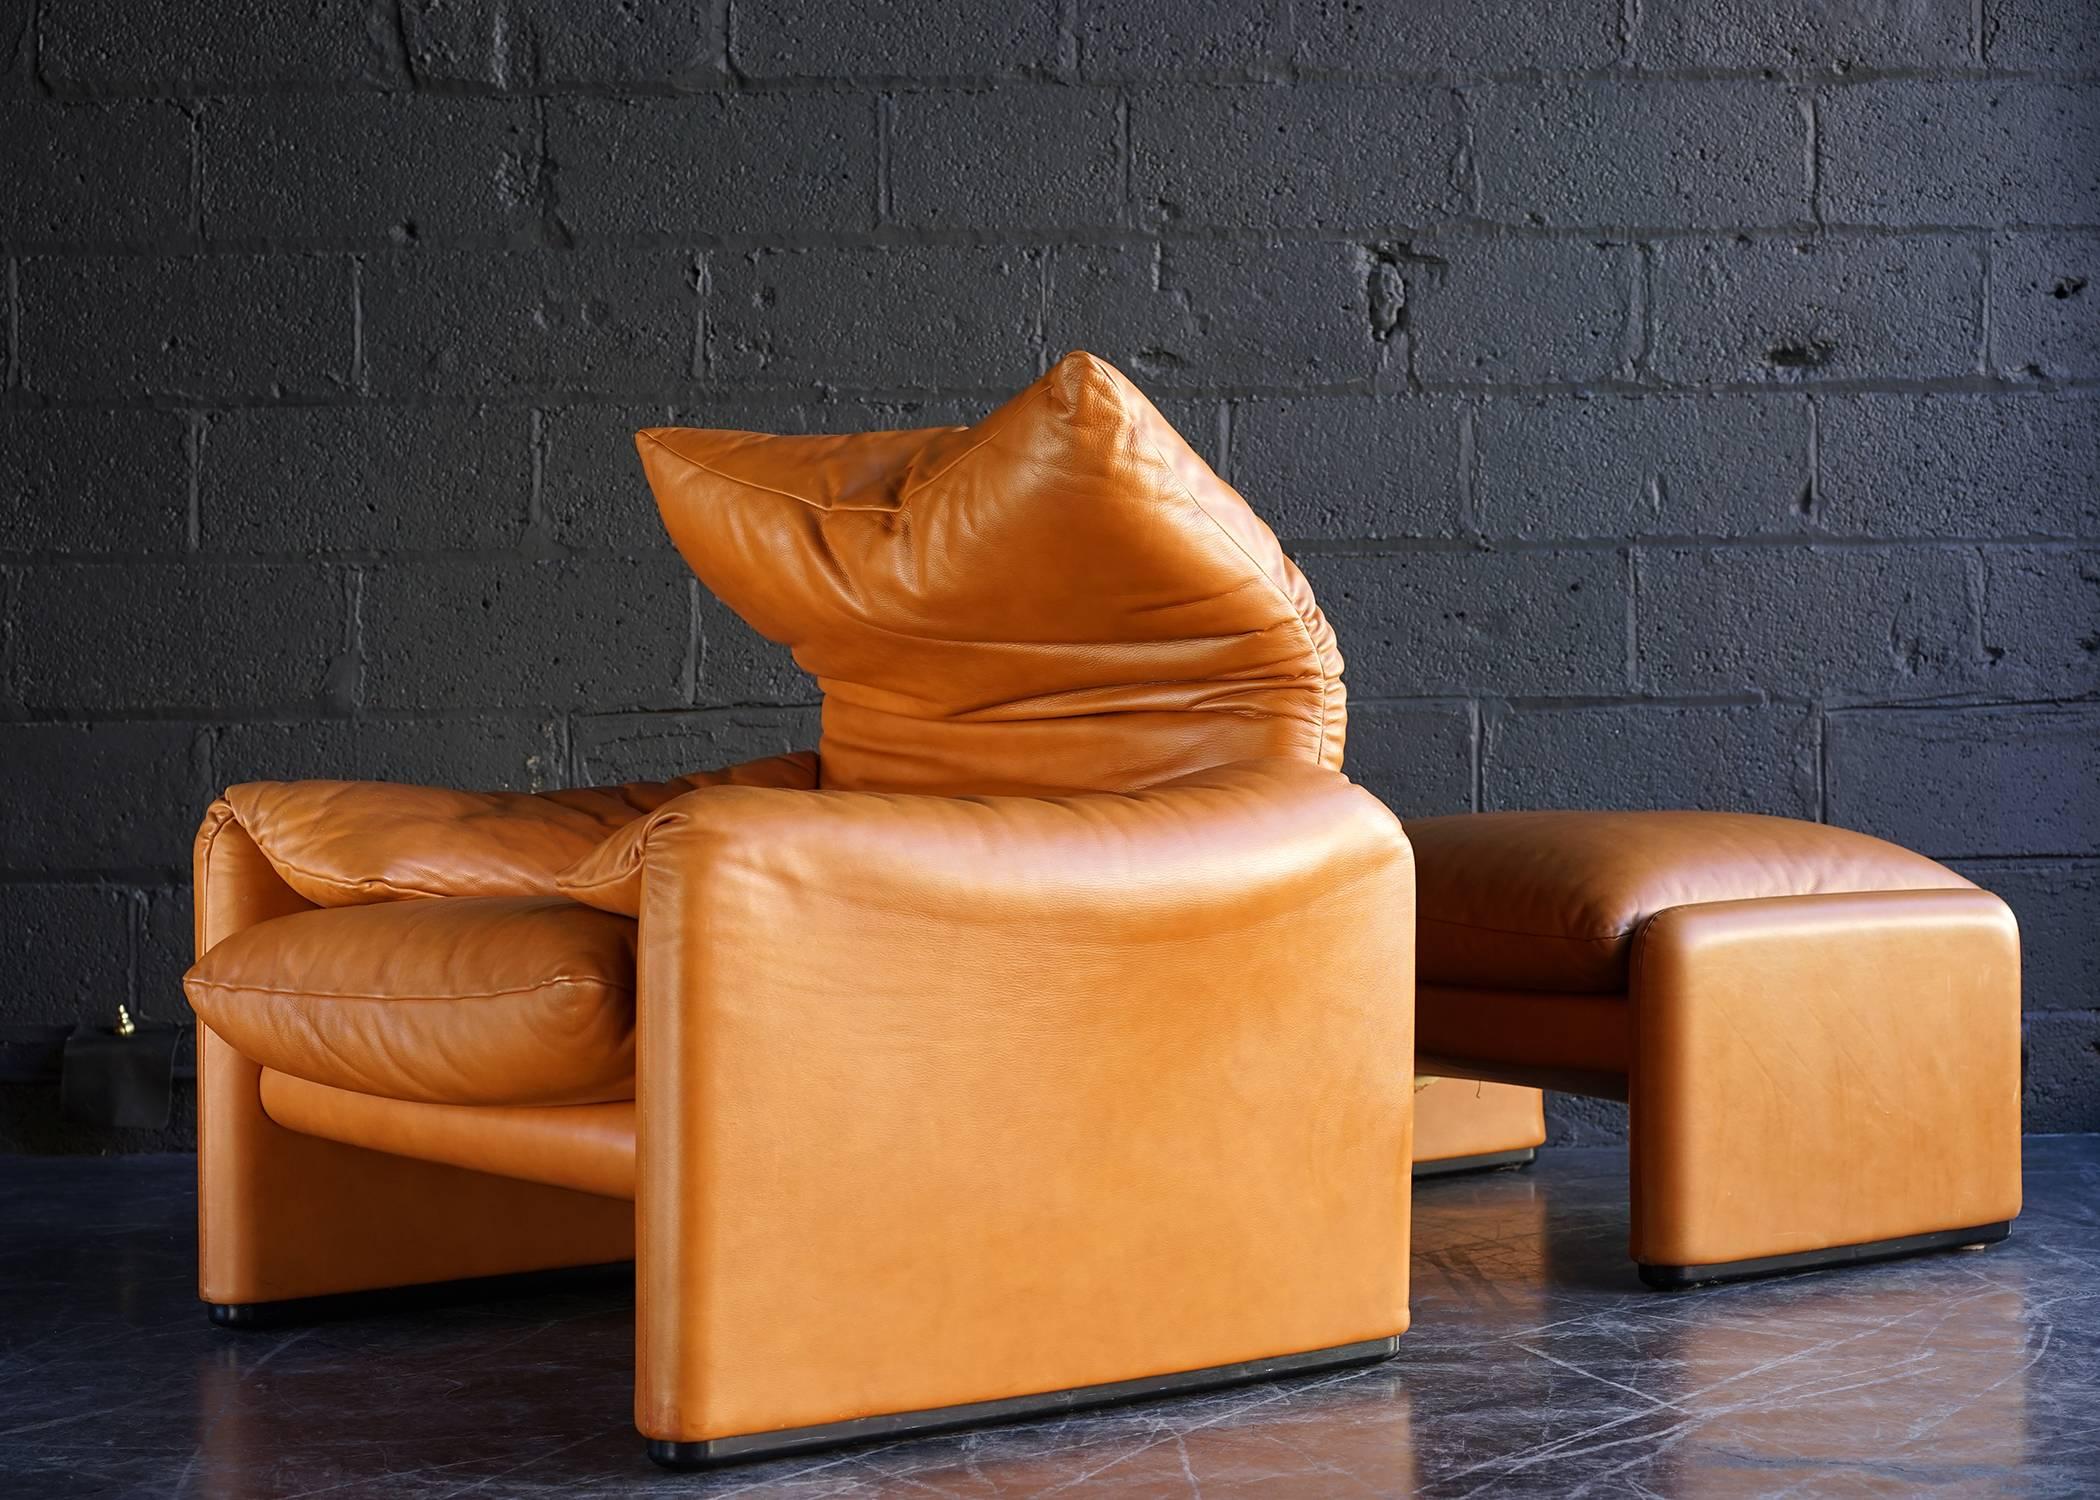 All original in fine vintage condition. Soft, supple leather with rich, warm tone. Features adjustable headrest with independent left/right movement. Exceptionally comfortable and expressive in form. Manufactured by Cassina in Italy.

Chair